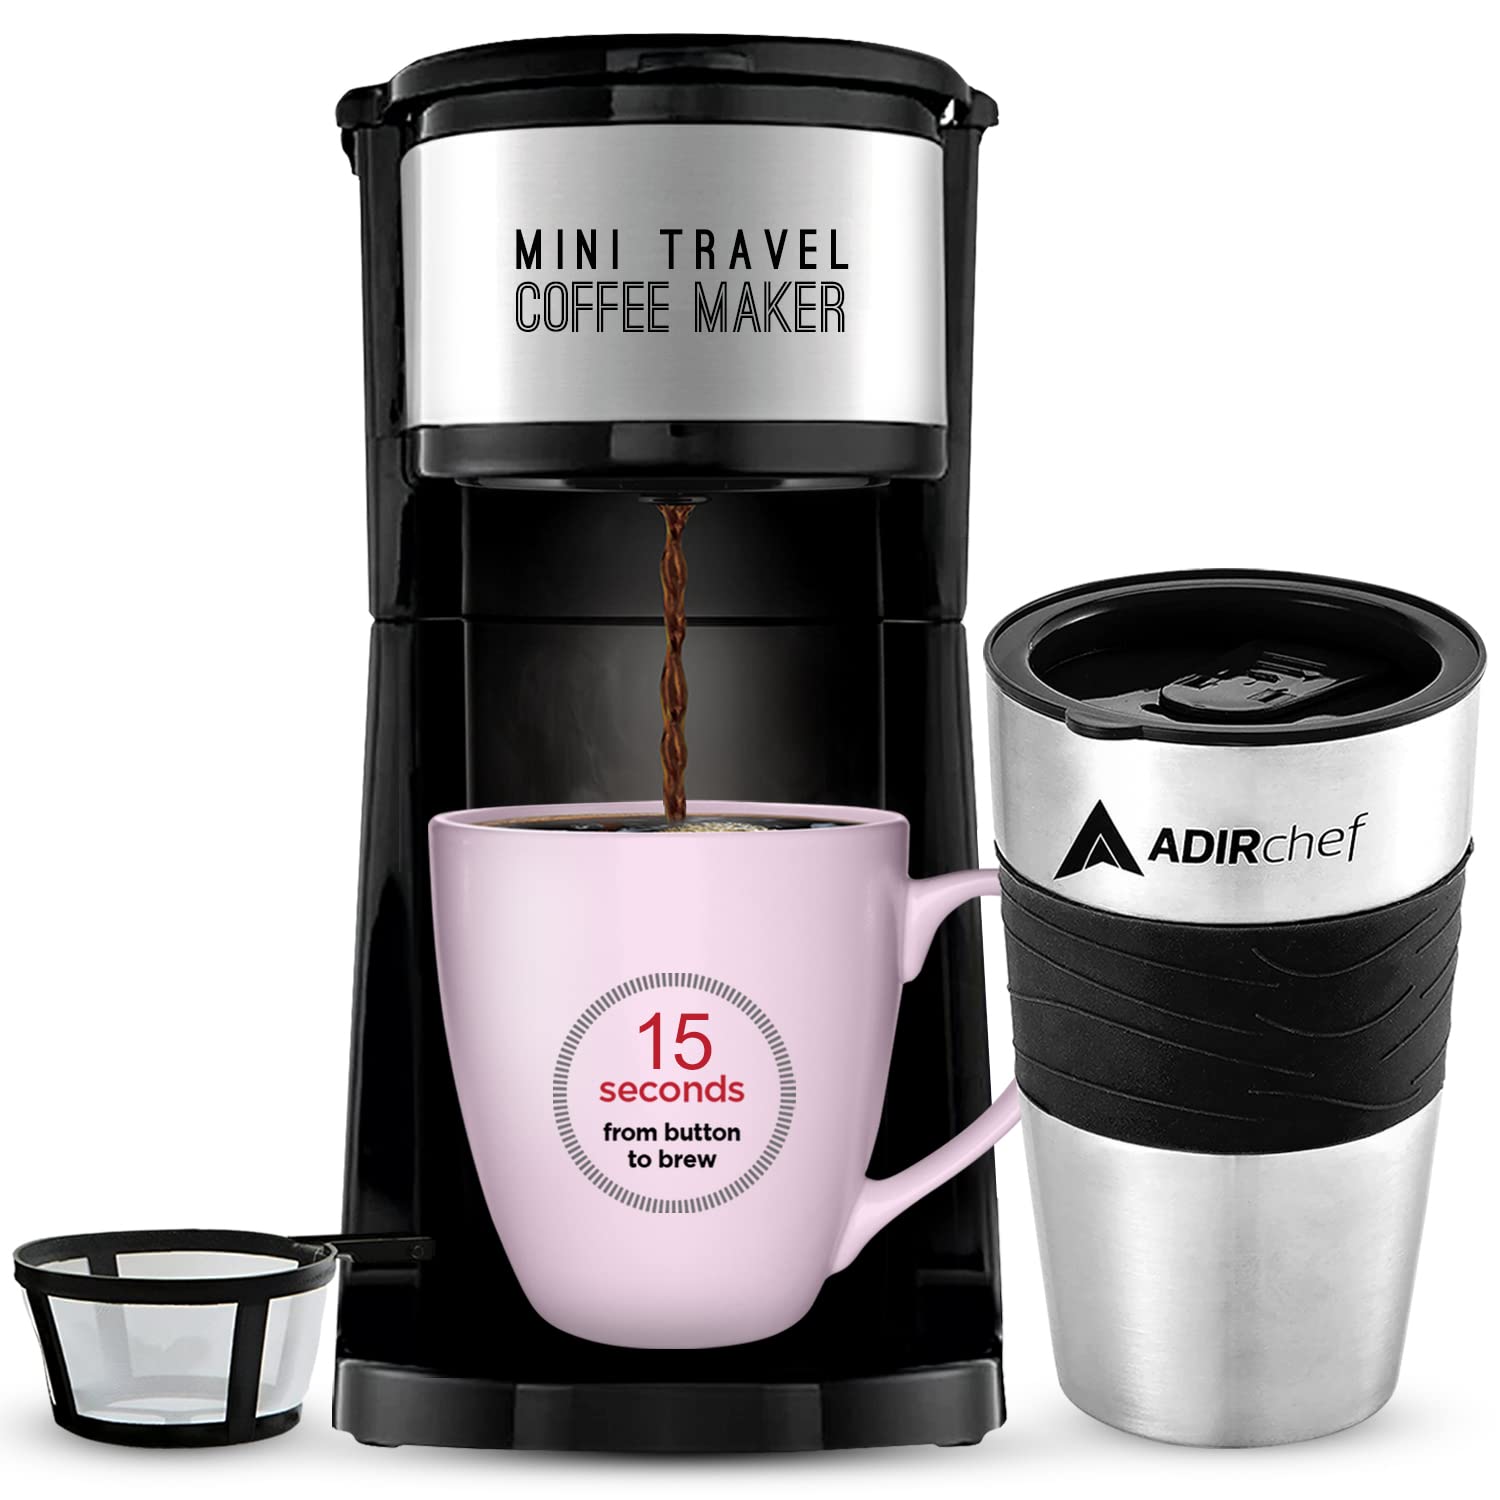 AdirChef Mini Travel Single Serve Coffee Maker & 15 oz. Travel Mug Coffee Tumbler & Reusable Filter for Home, Office, Camping, Portable Small and Compact for Fathers Day (Black)  - Acceptable